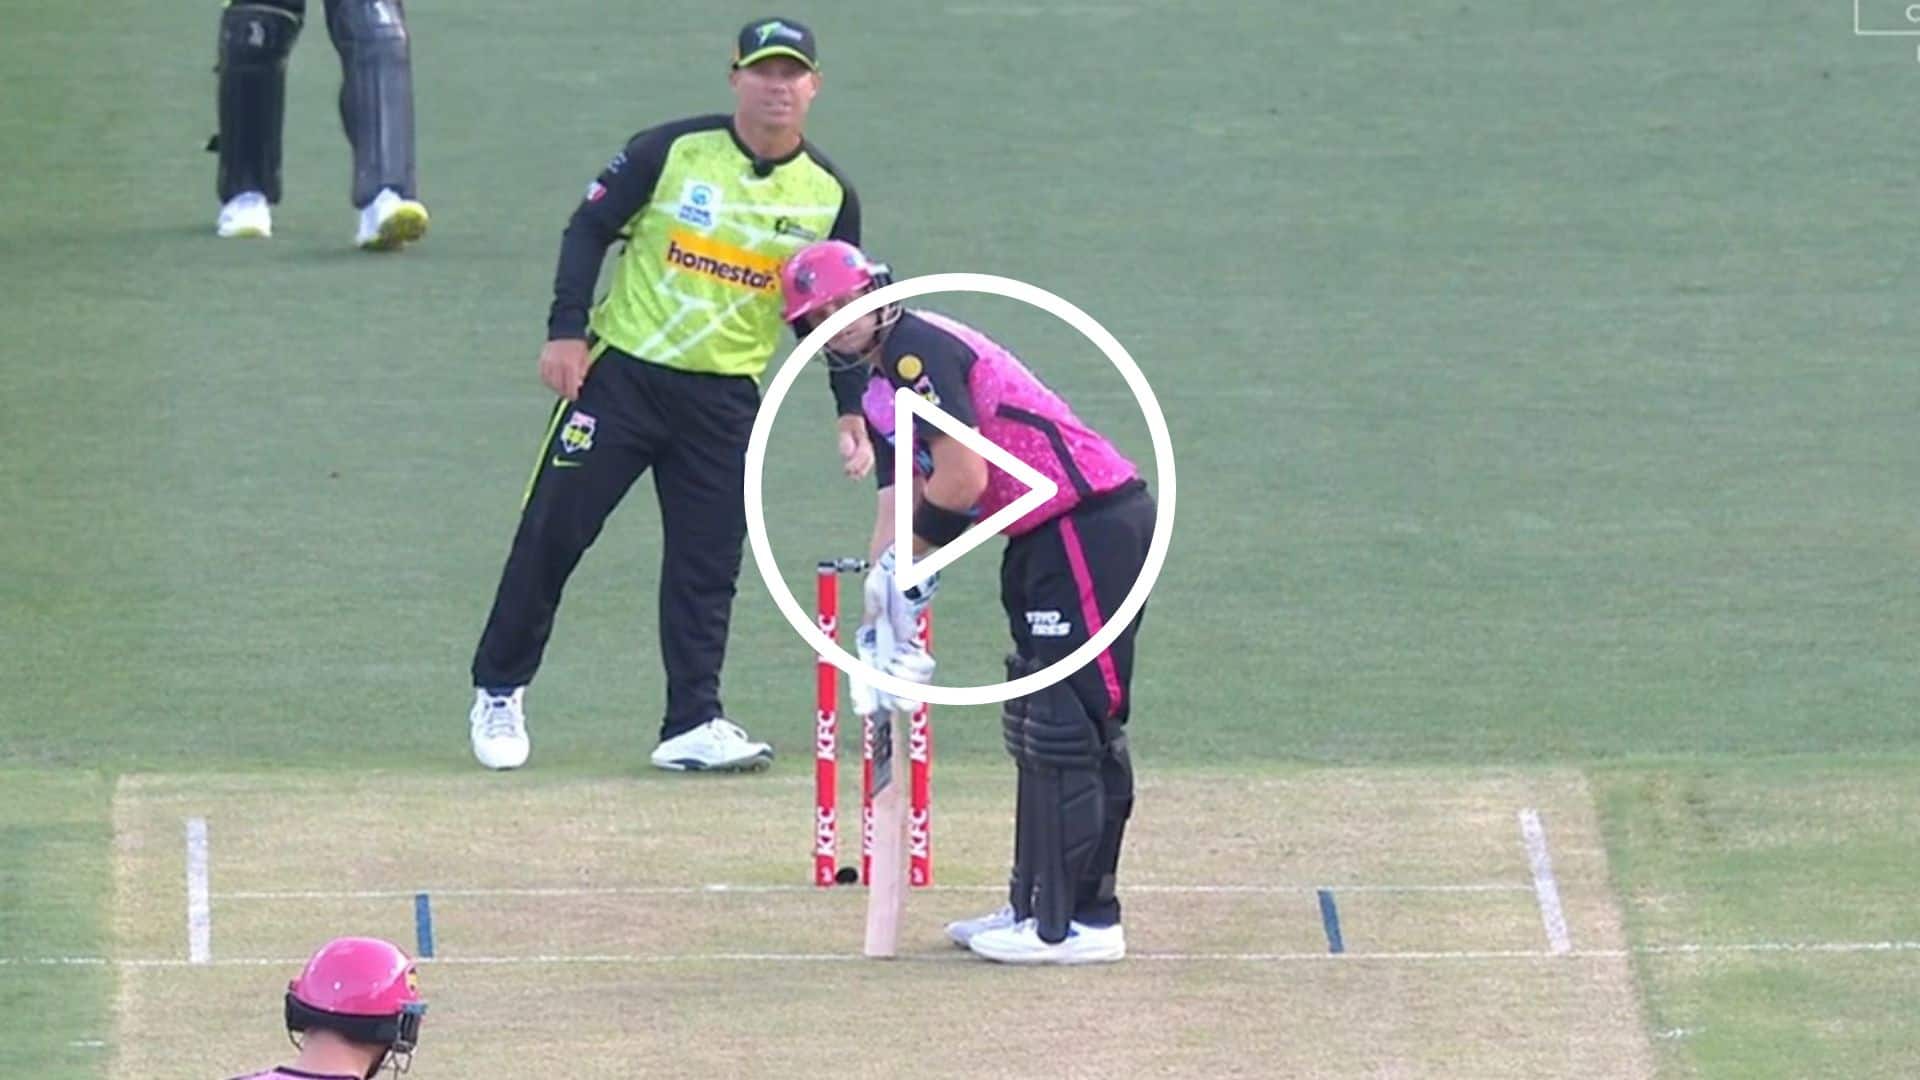 [Watch] 'If You Open The Batting' - David Warner Sledges Steve Smith During BBL Game